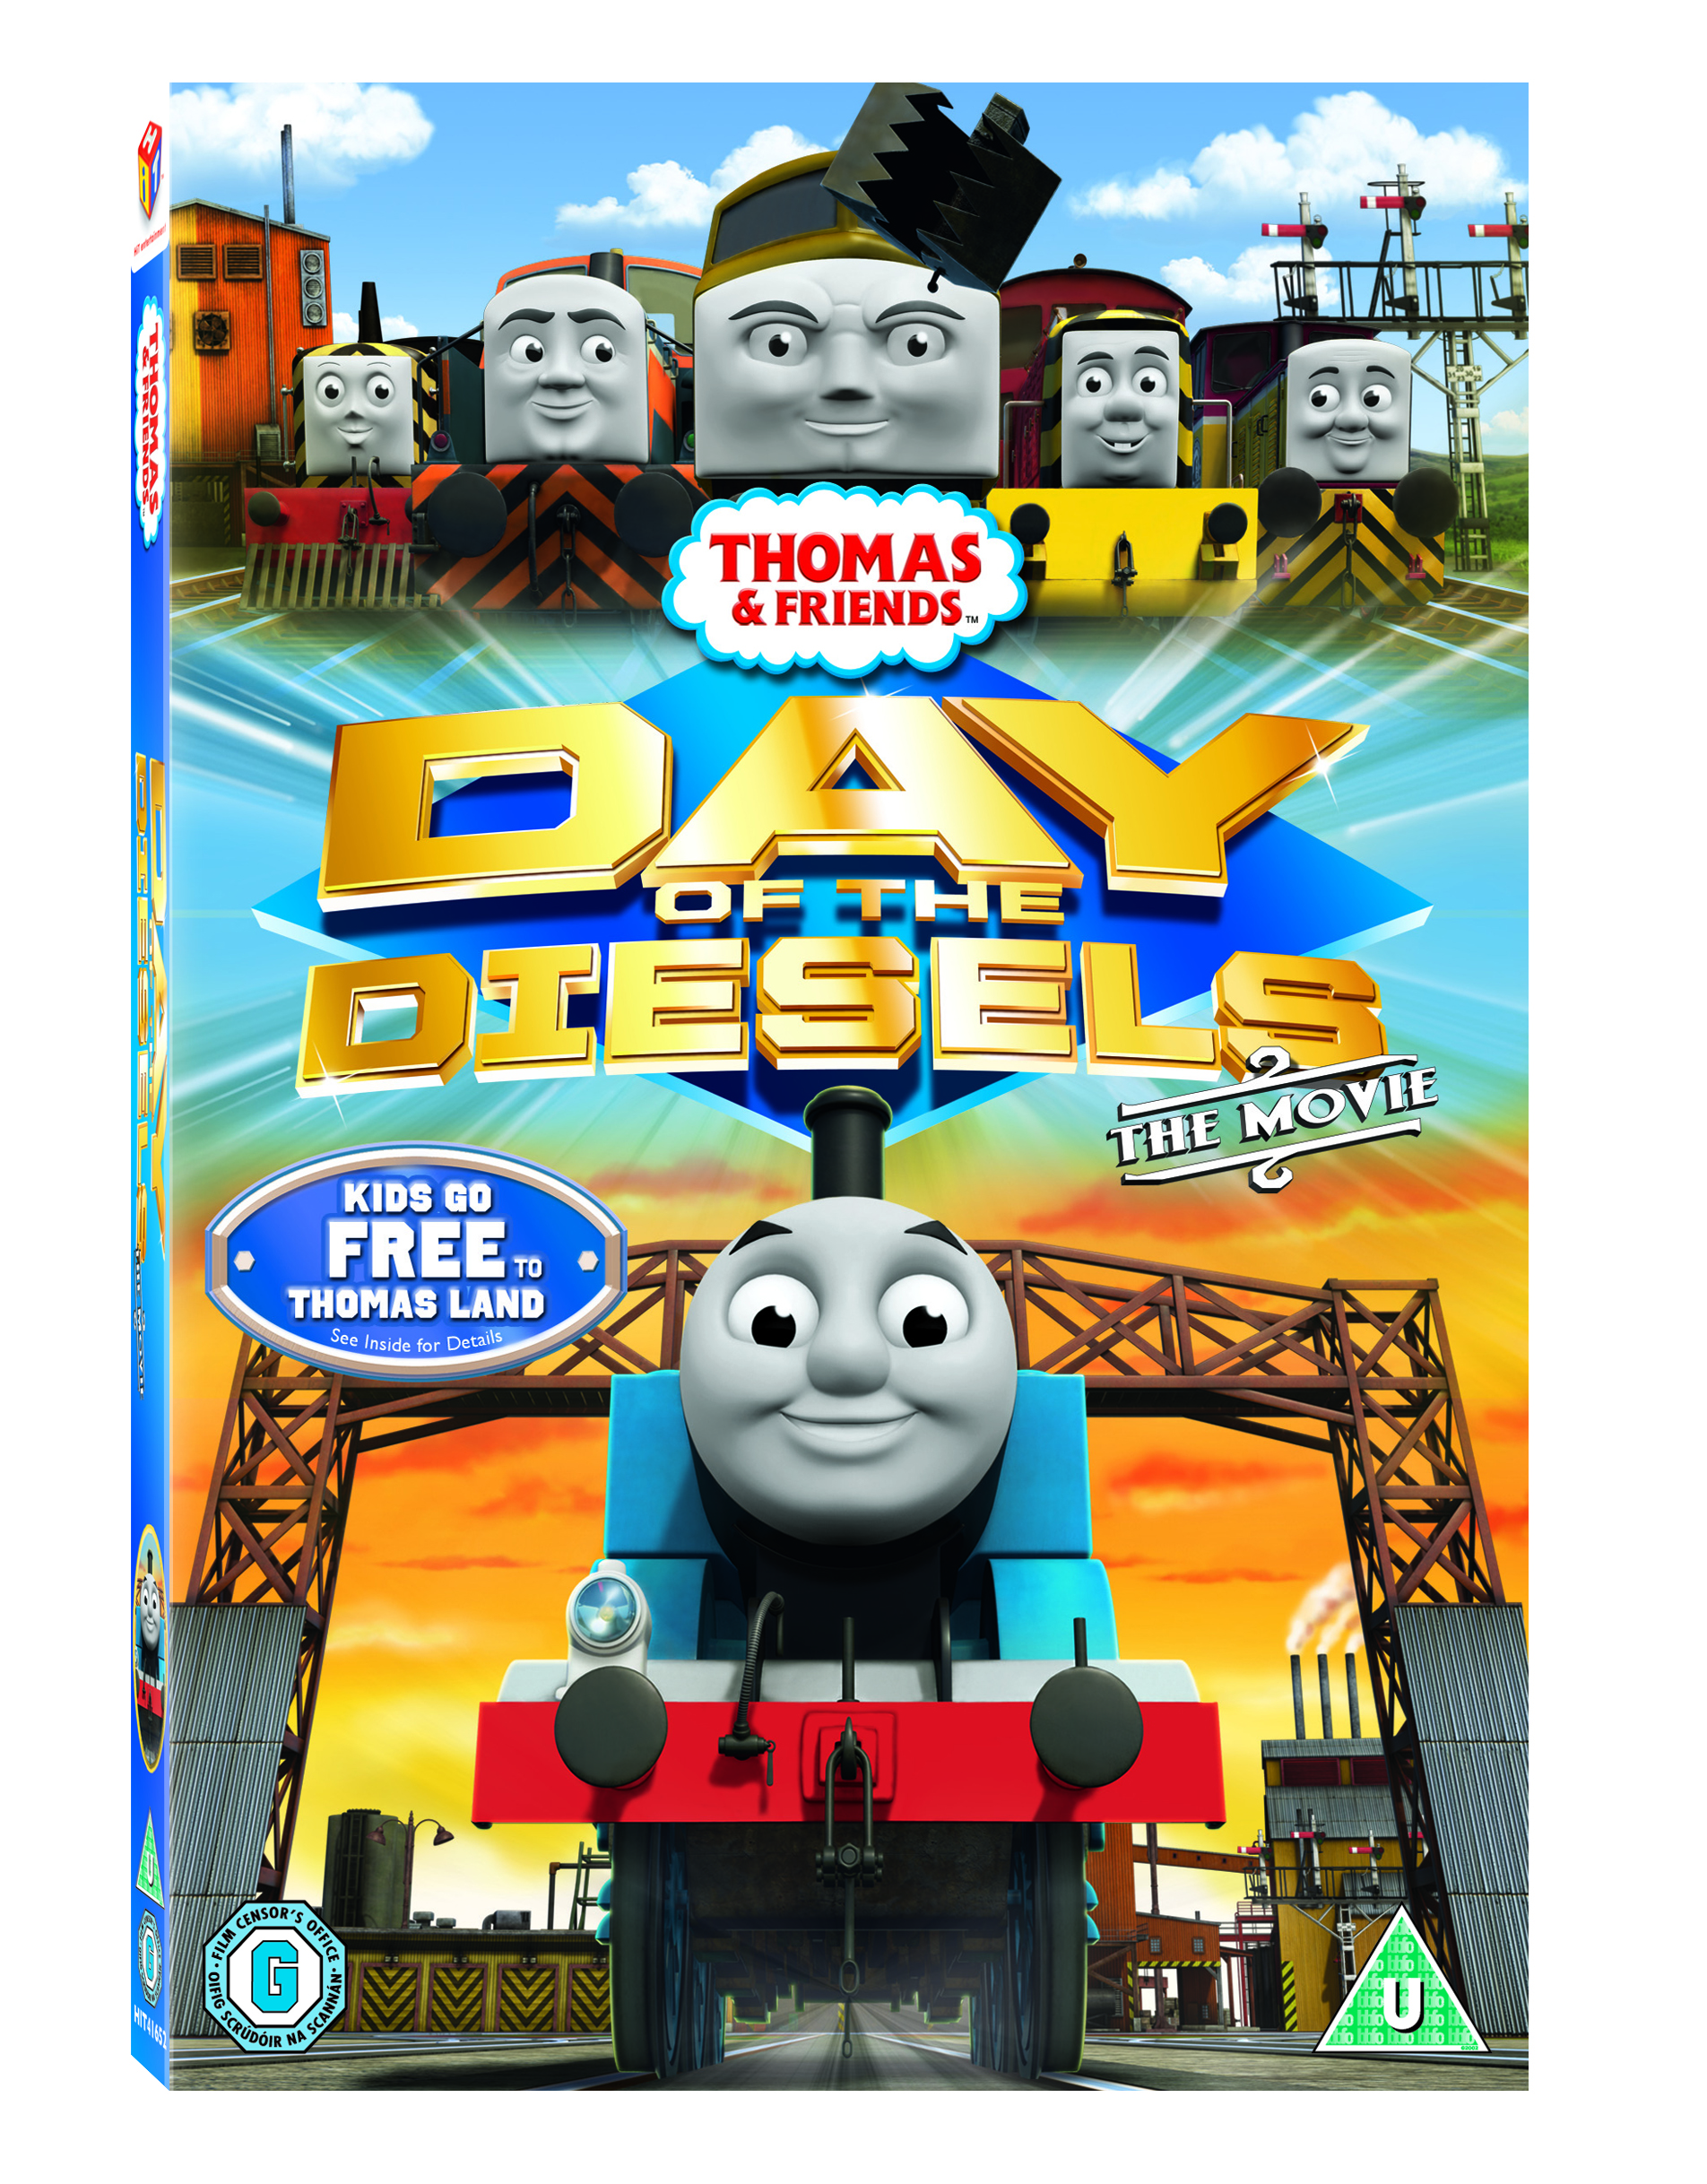 Thomas & Friends day of the Diesel